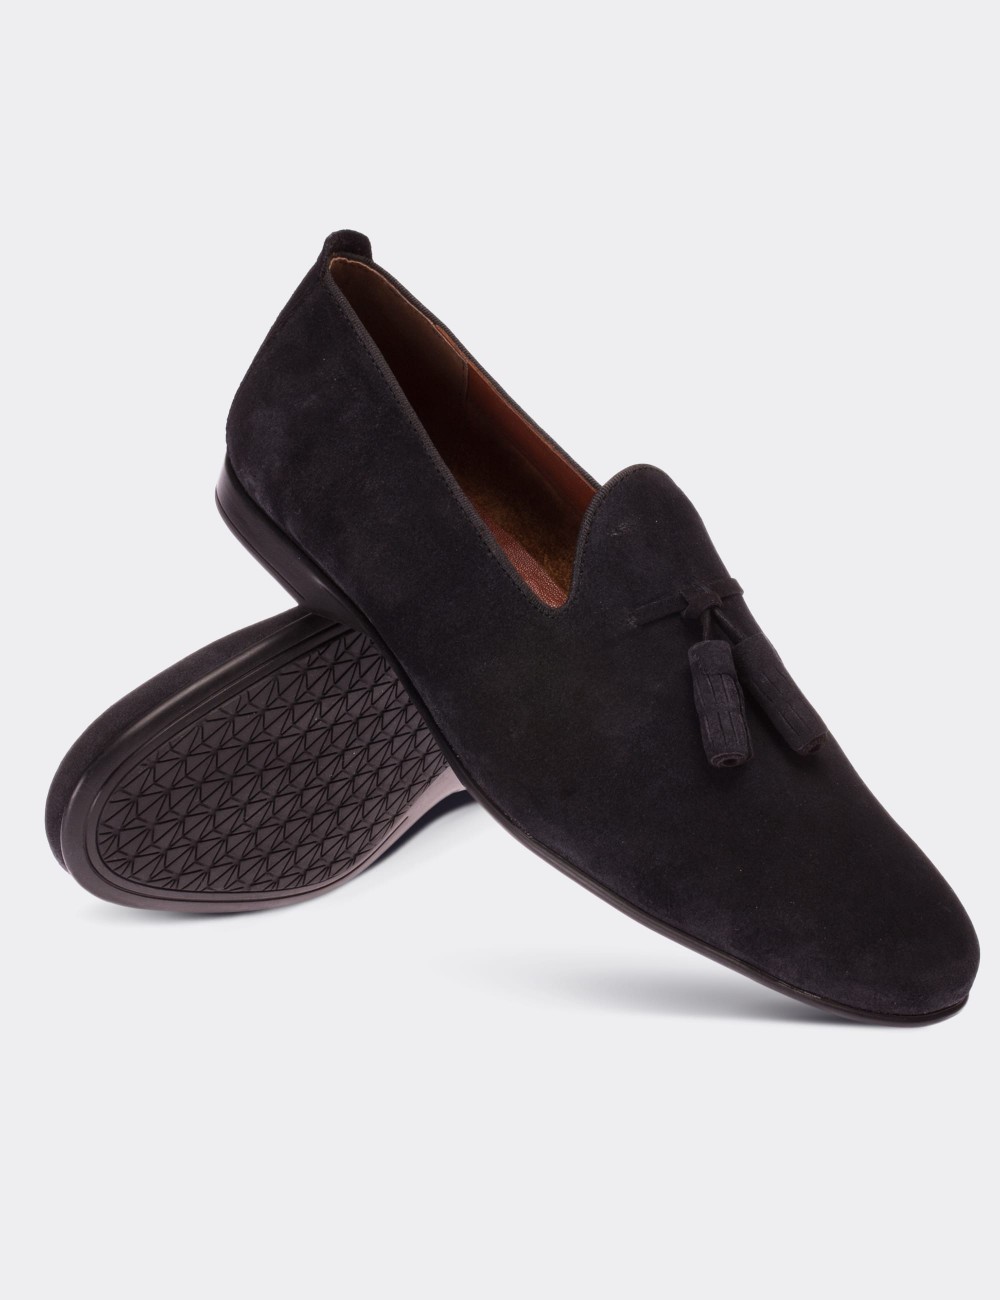 Navy Suede Leather Loafers - 01702MLCVC02